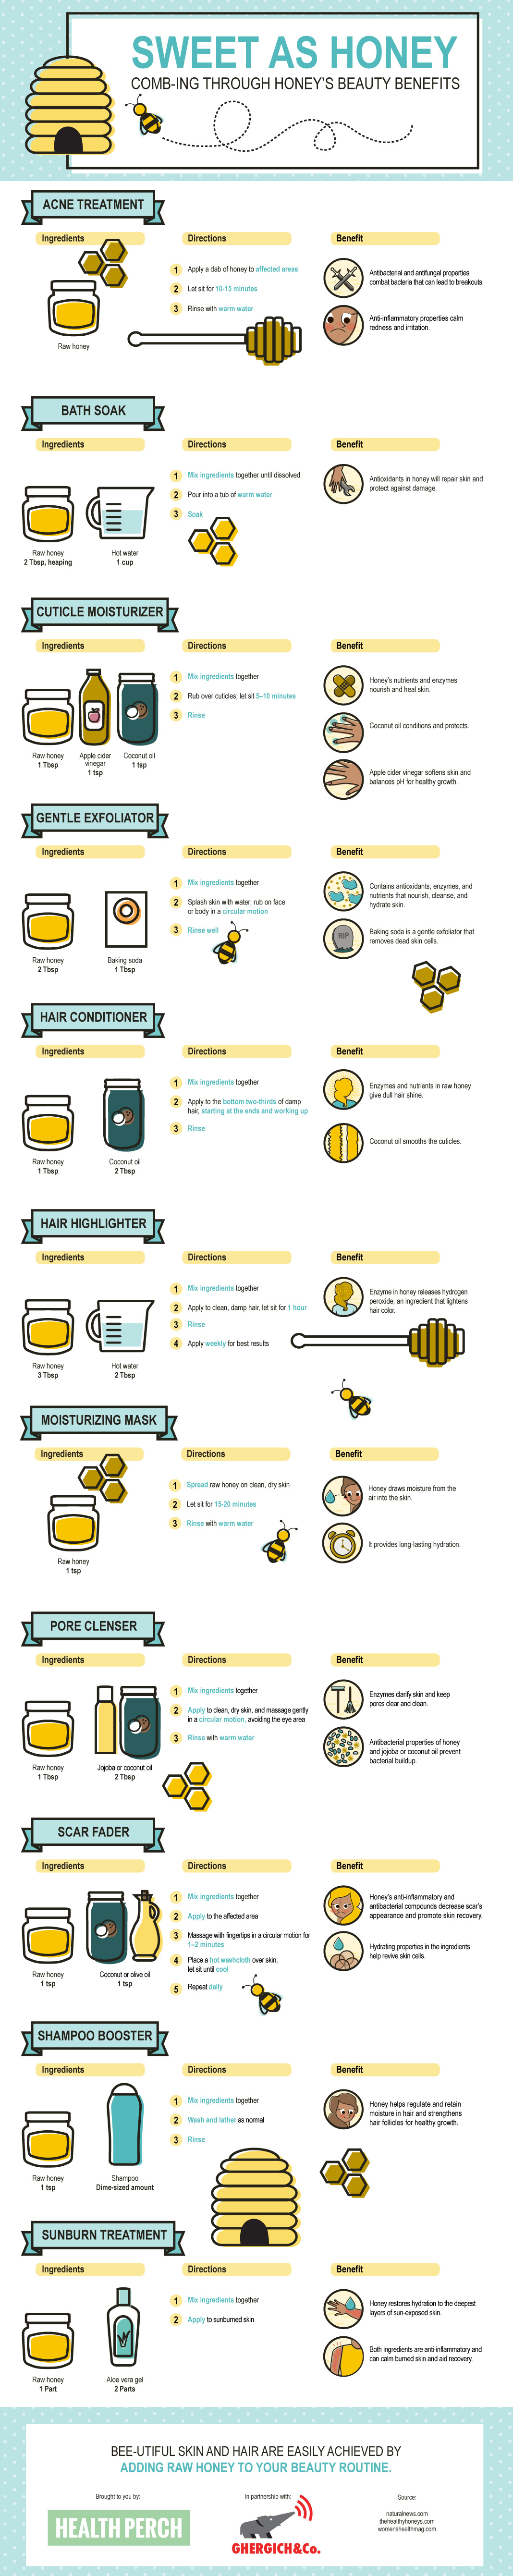 The Best DIY Honey Recipes For All Beauty Needs Infographic